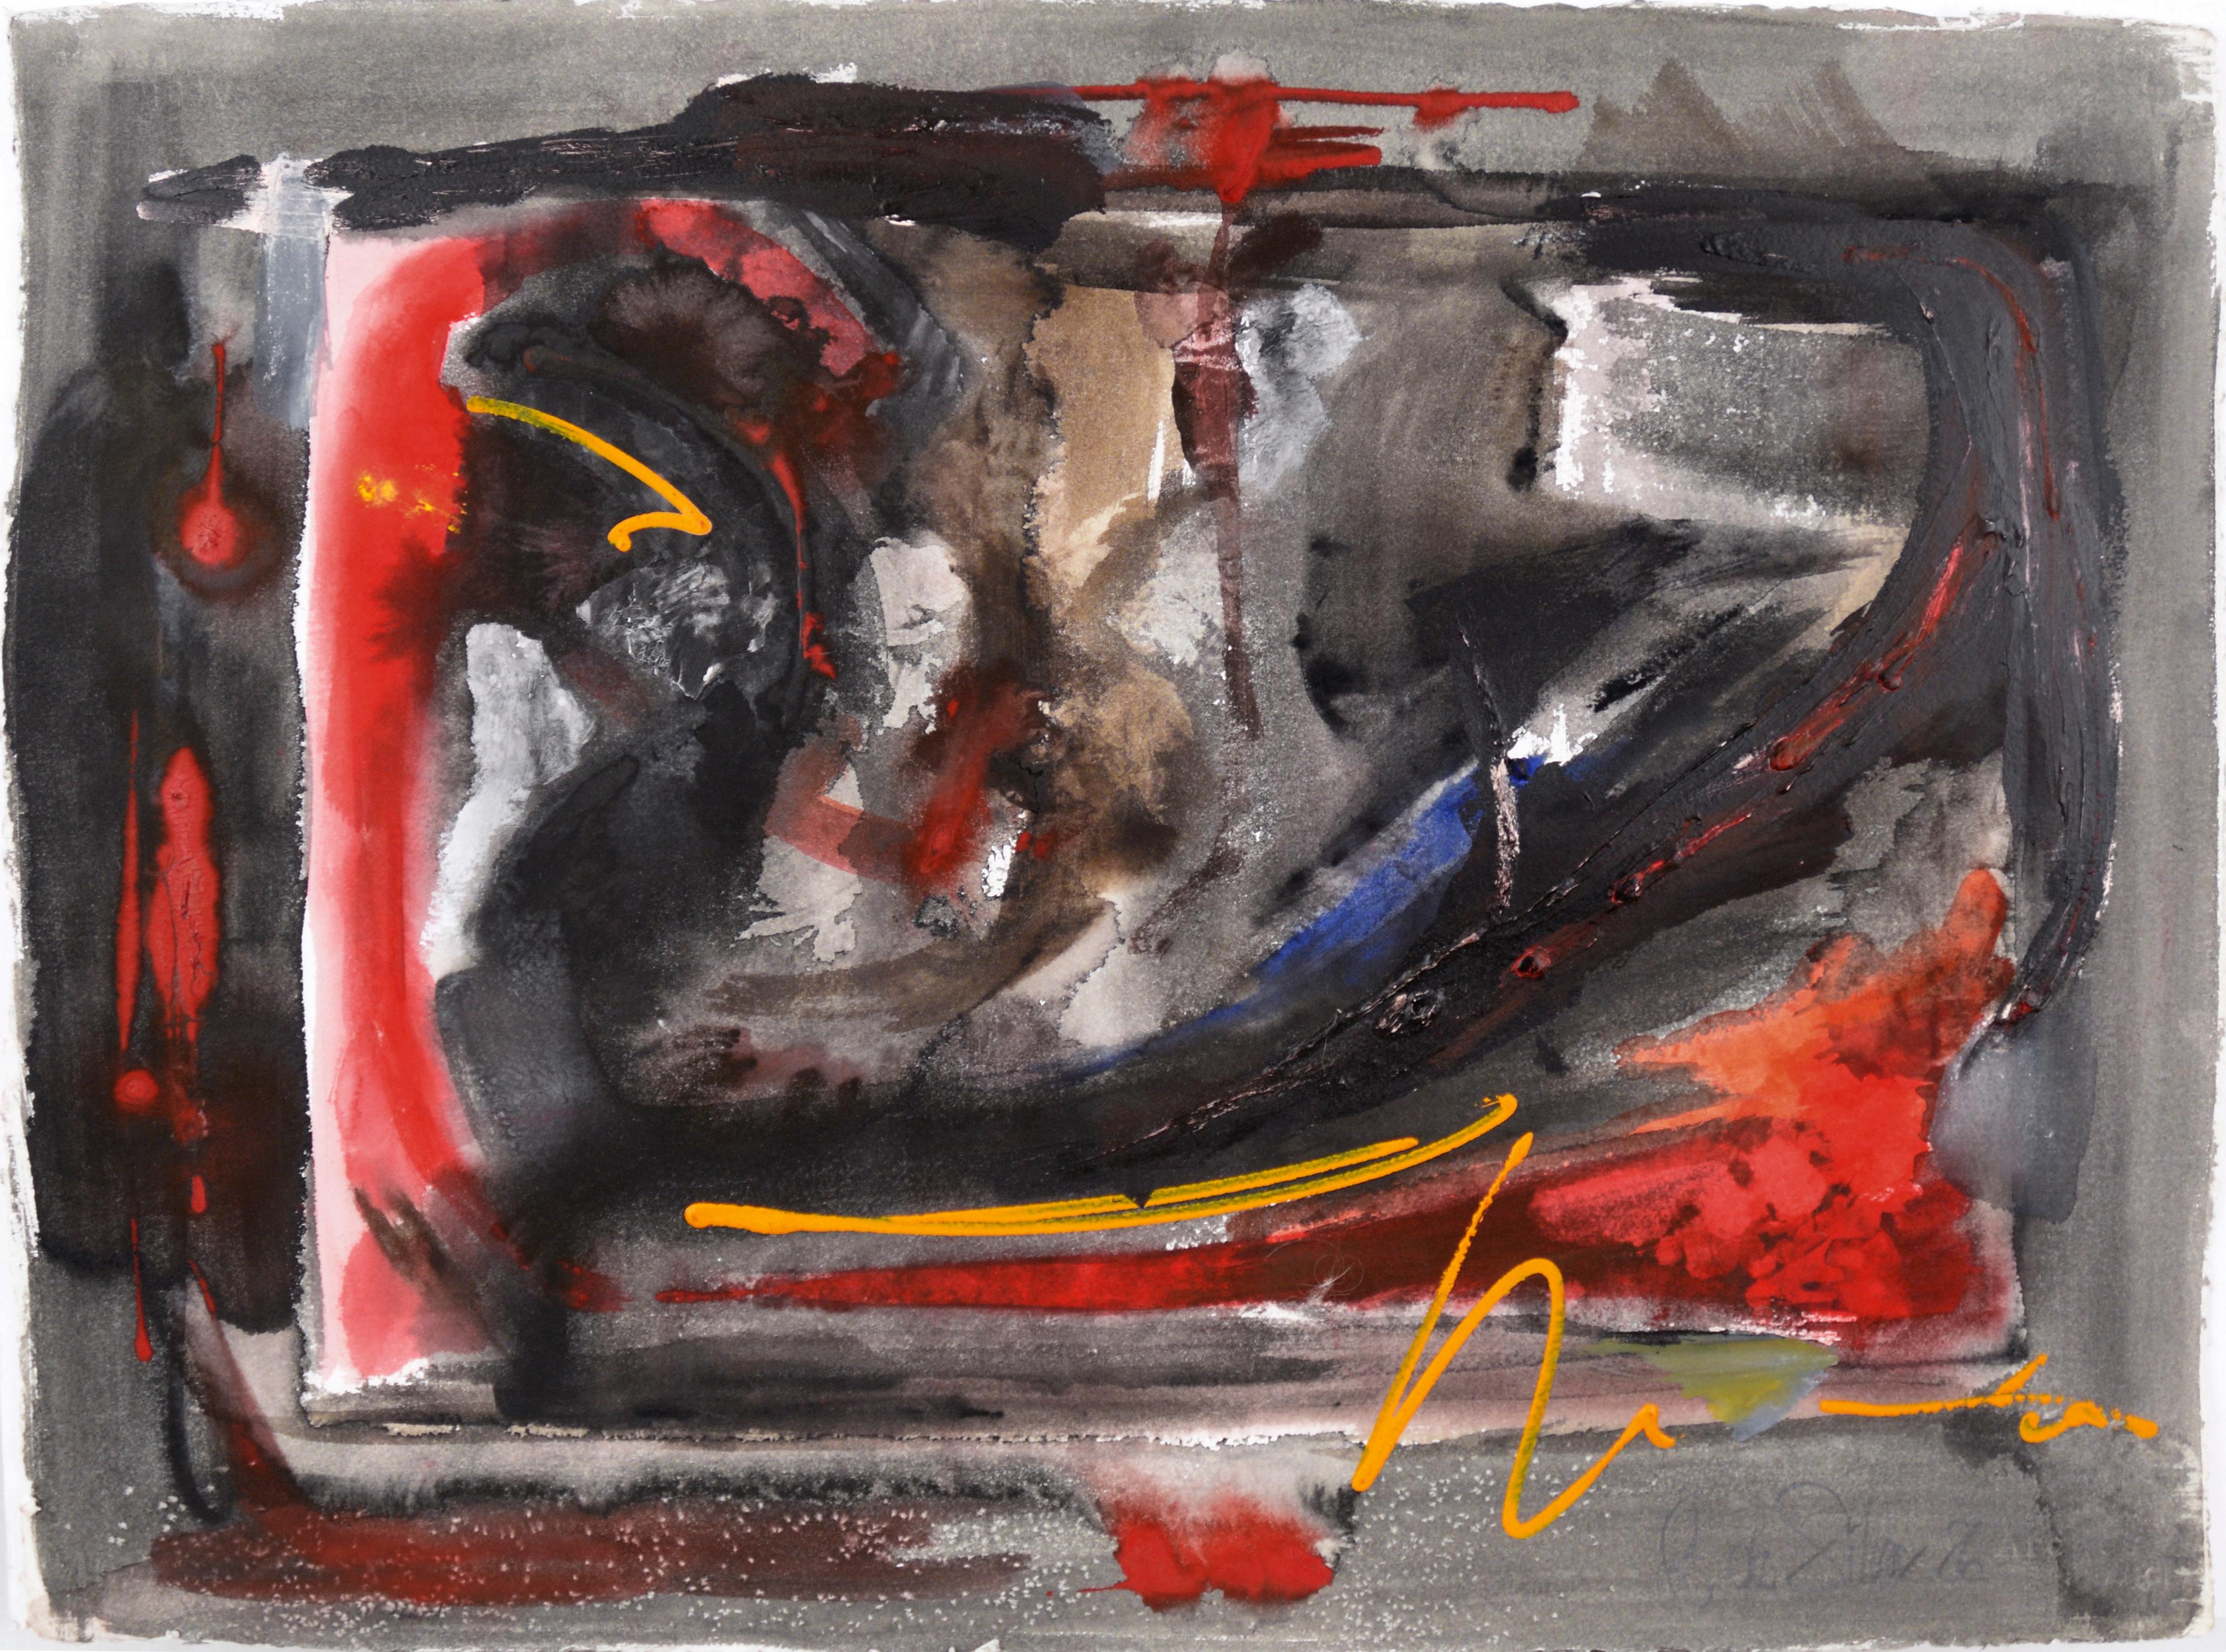 Primary Colors Abstract Expressionist - Mixed Media on Paper - Mixed Media Art by Ricardo de Silva